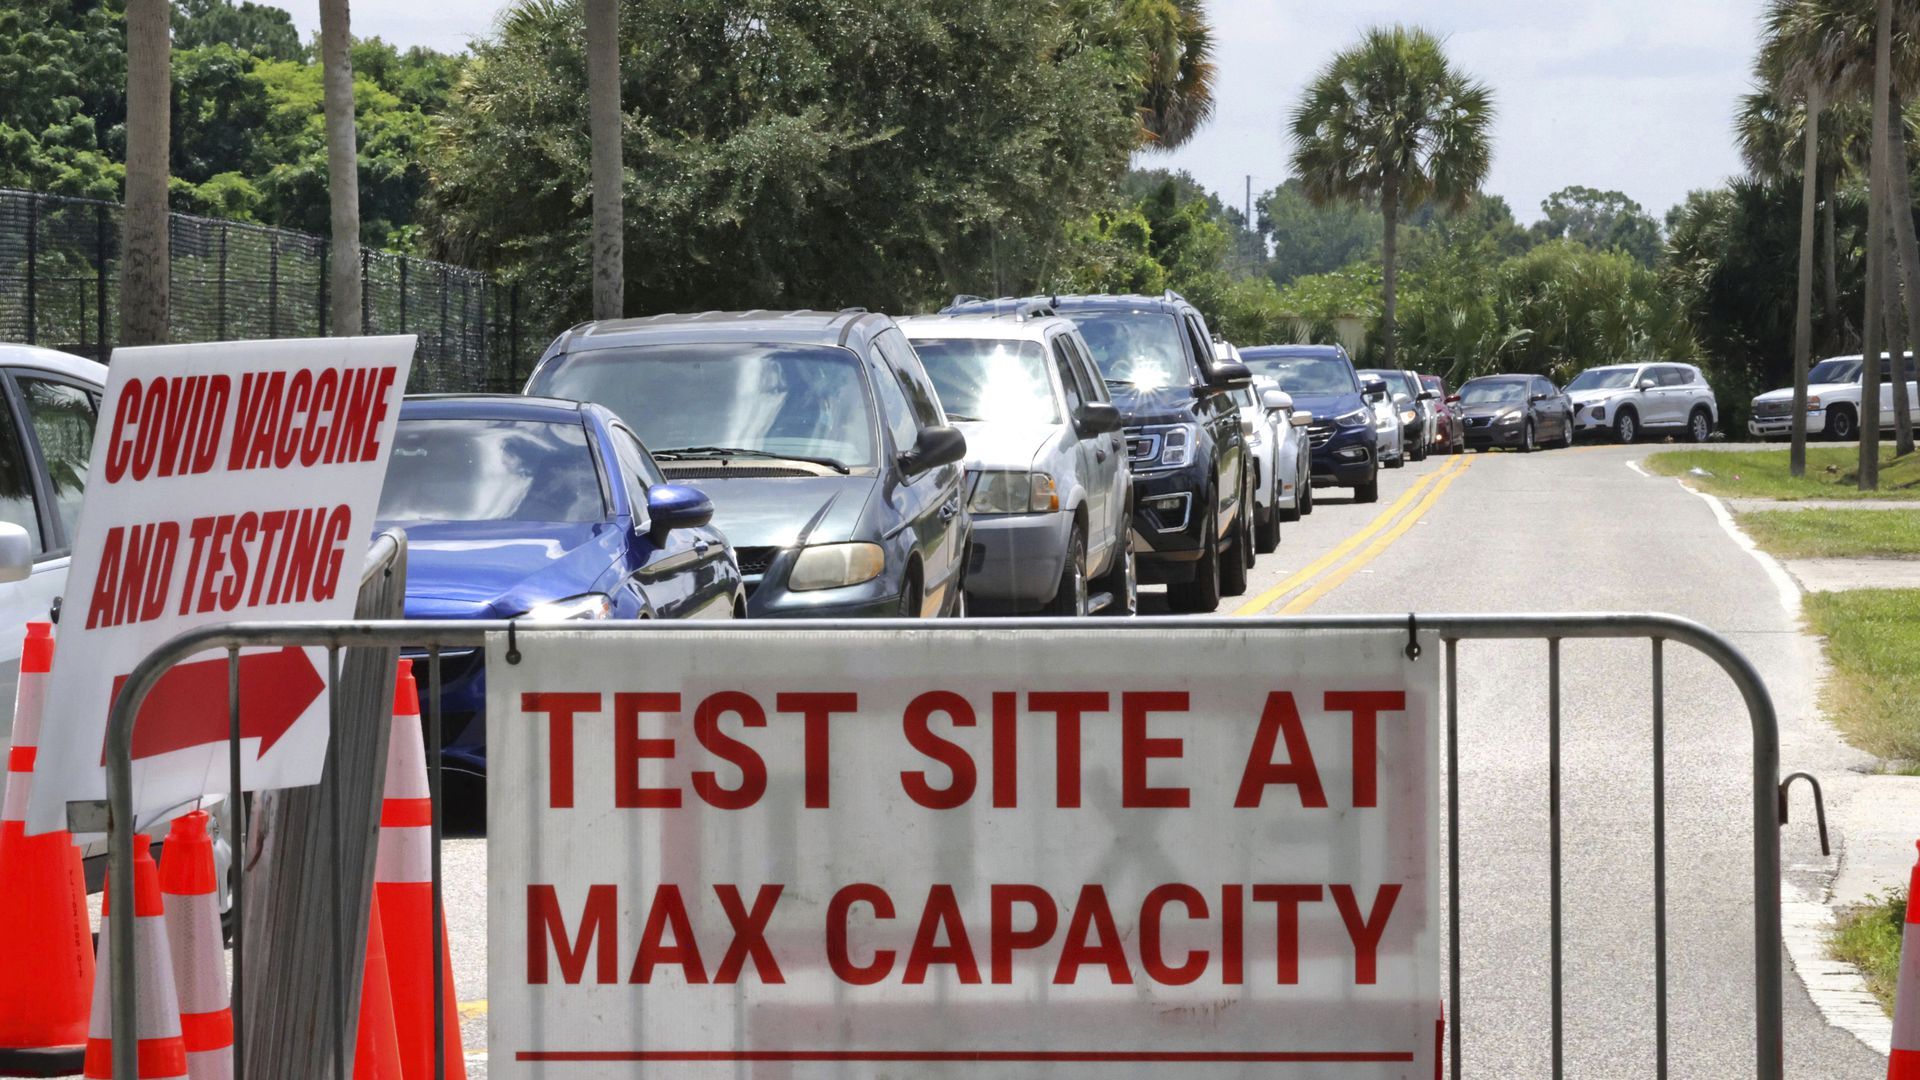 Picture of cars lining up for a testing site and a sign that reads "Test site at max capacity"